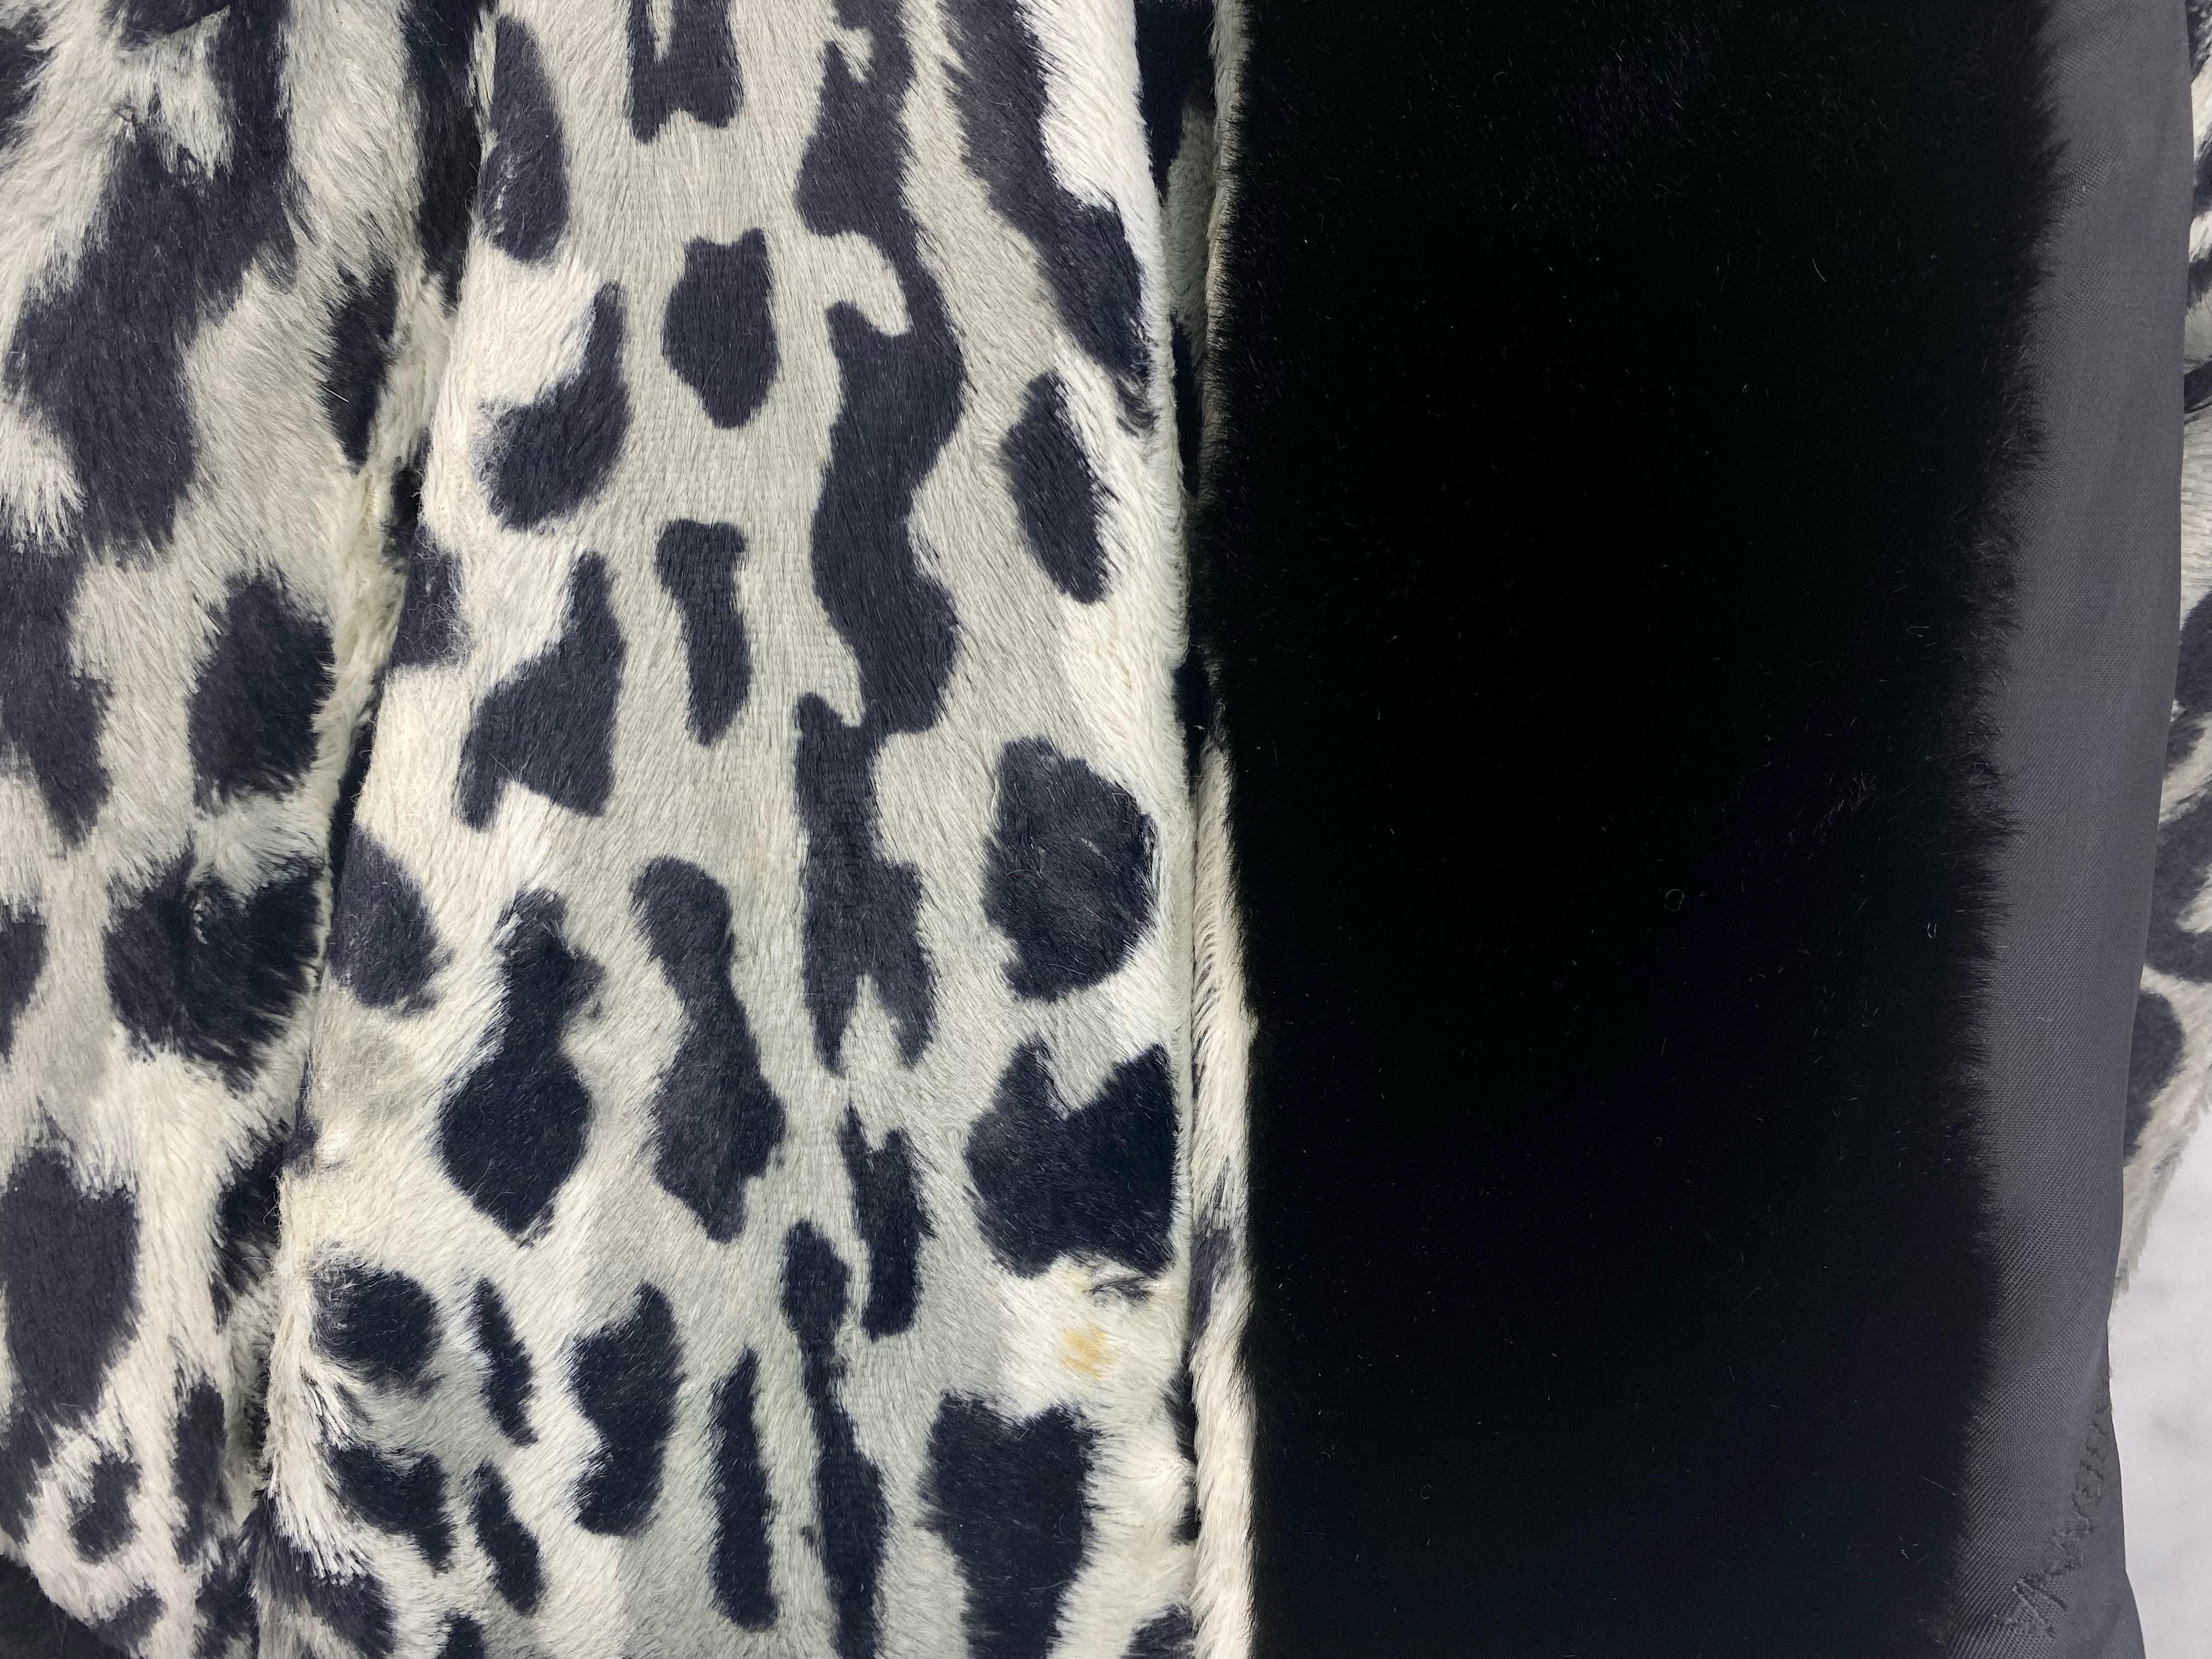 Mid 1990s Dolce & Gabbana Cheetah Print Black Faux Fur Wrap Coat In Good Condition For Sale In West Hollywood, CA